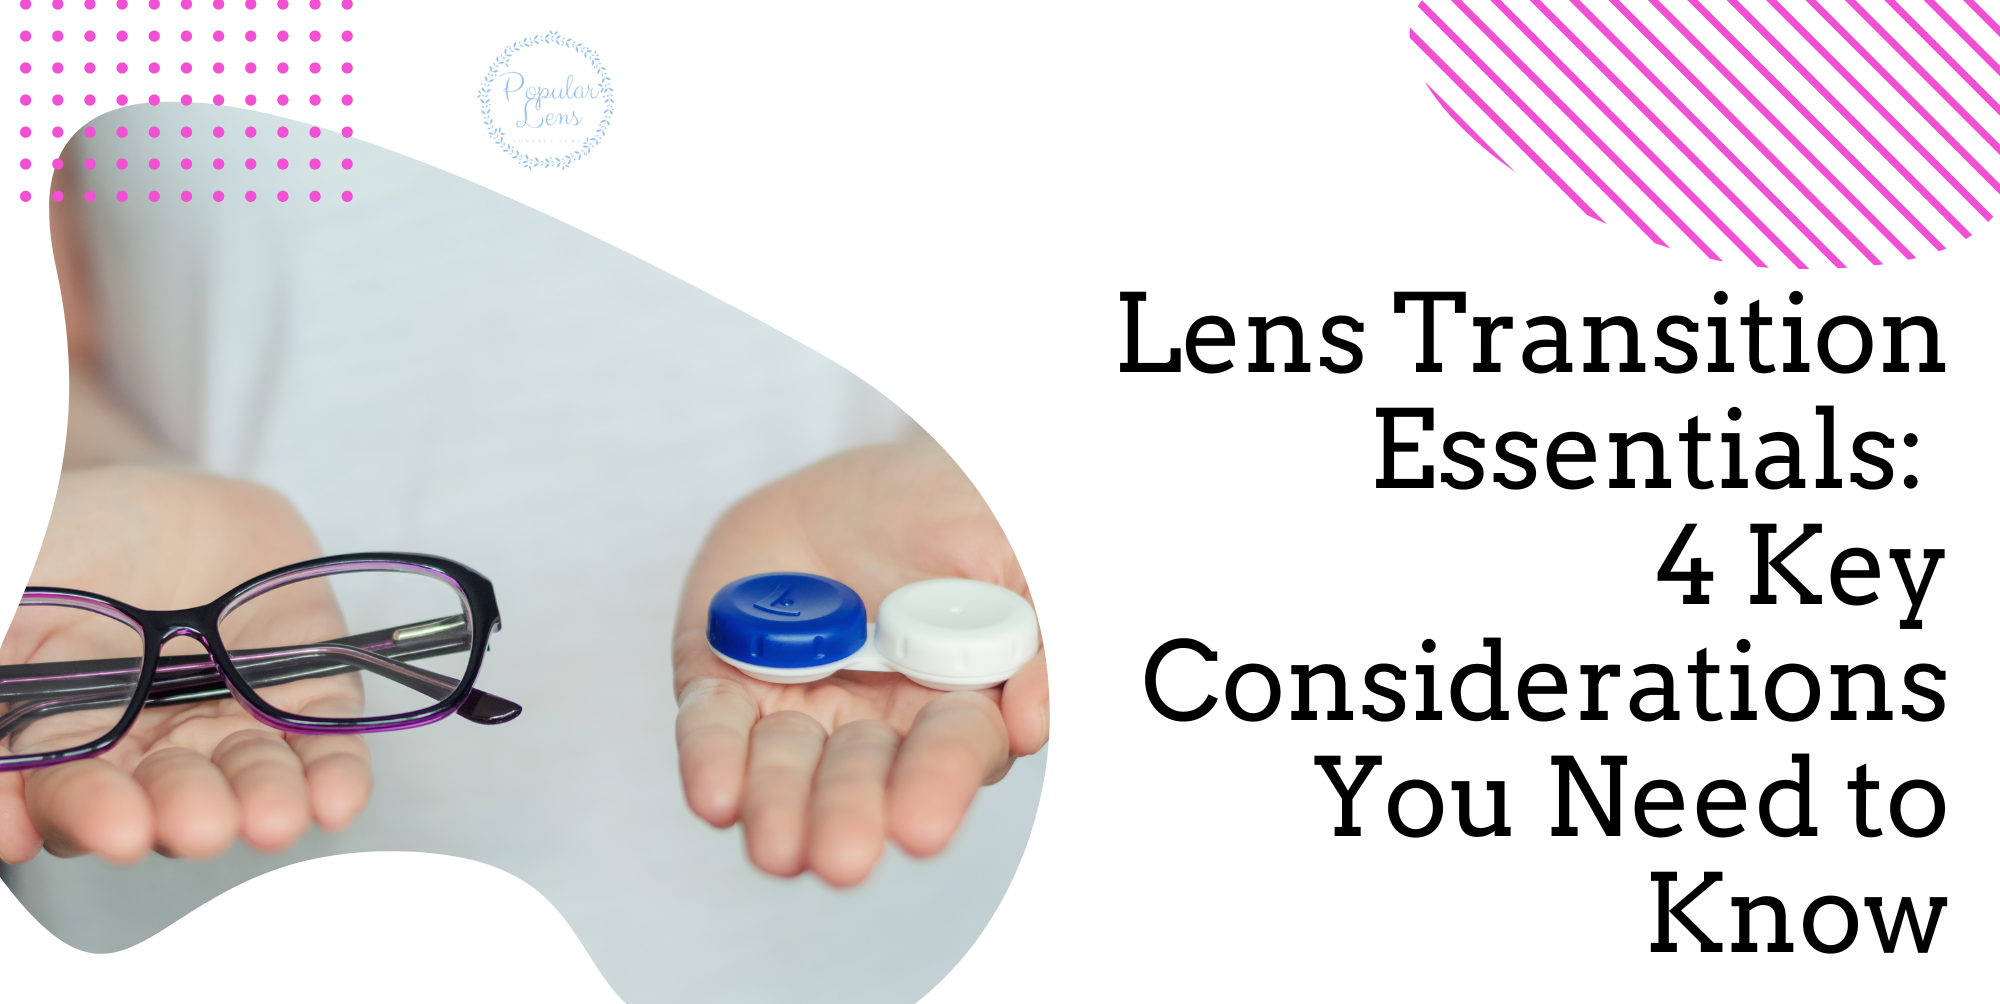 Lens Transition Essentials, Contact Lenses, Hygiene, Lifestyle, Tips, Must Know